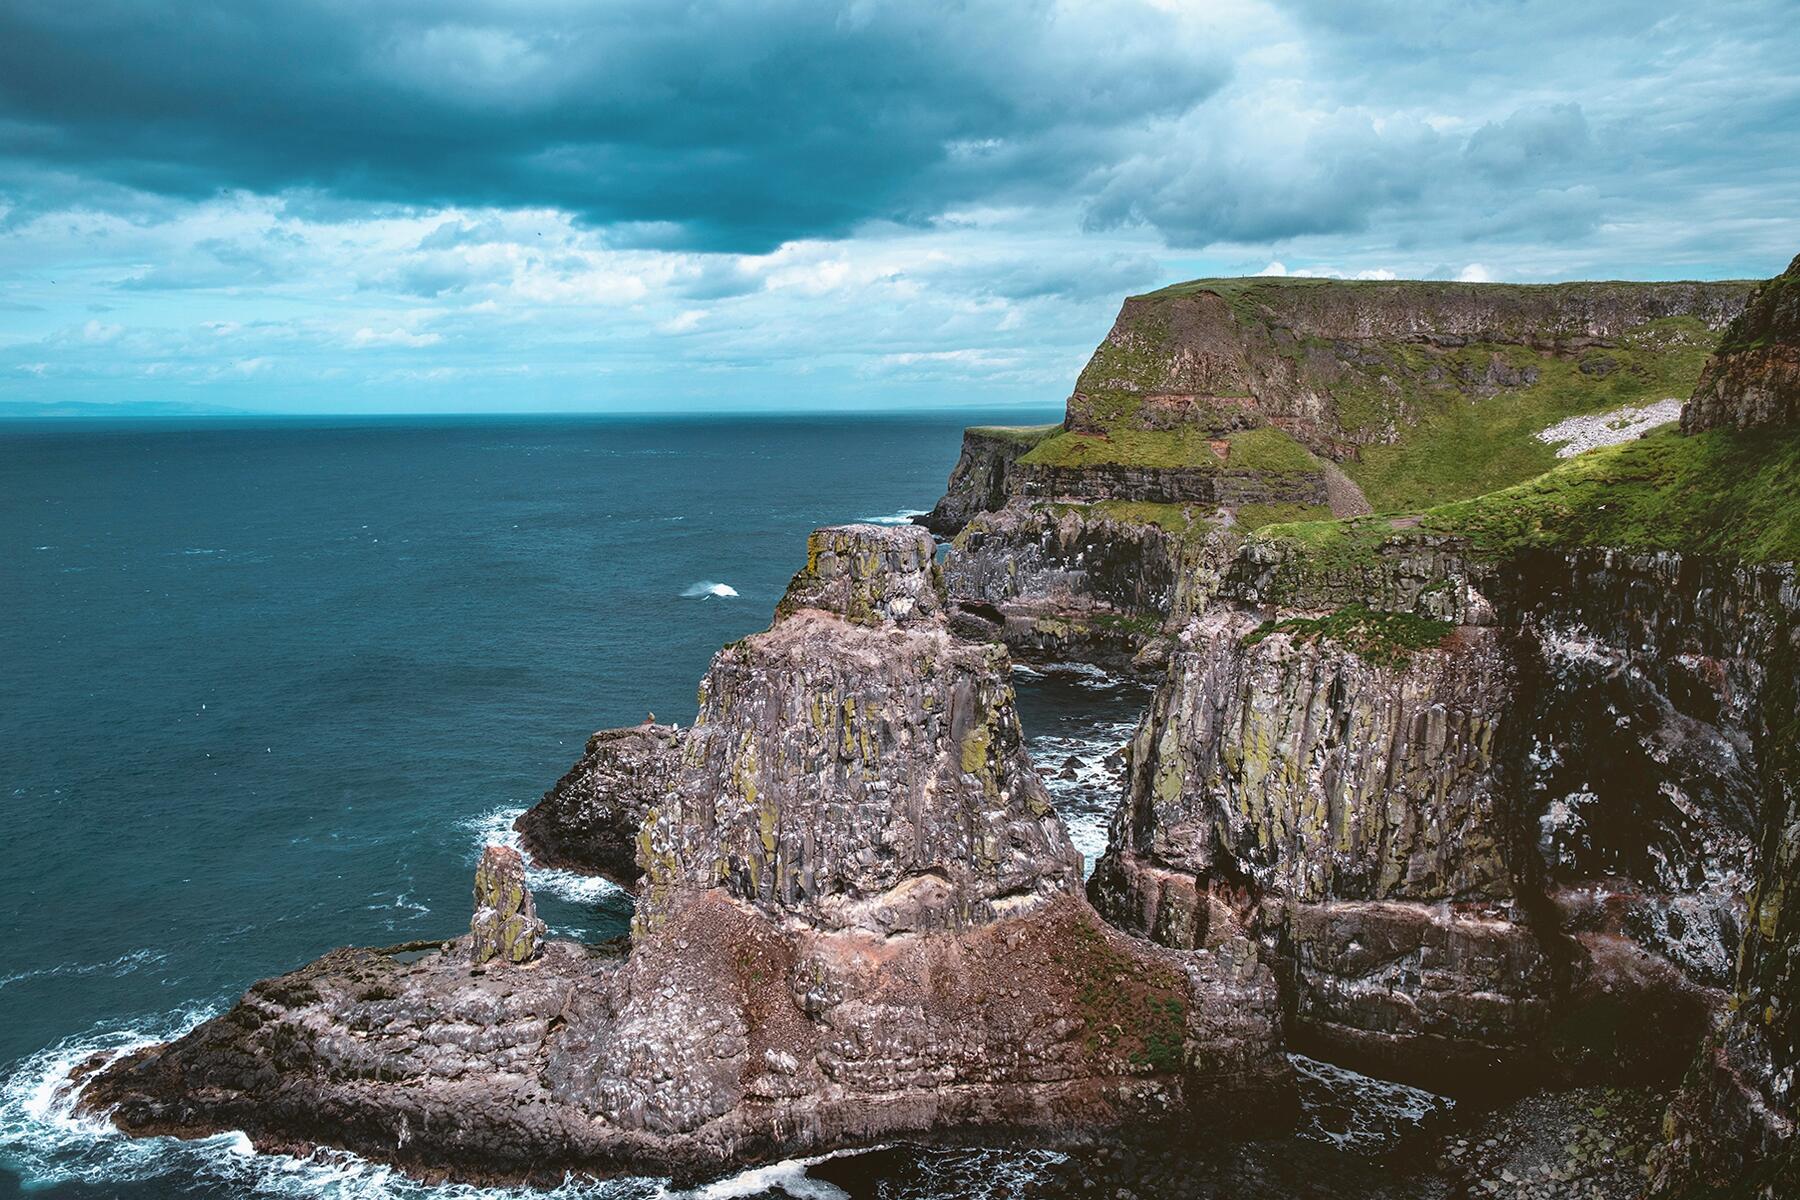 <a href='https://www.fodors.com/world/europe/england/experiences/news/photos/best-islands-to-visit-in-the-united-kingdom#'>From &quot;12 Stunning Islands in the United Kingdom You’ve Never Heard Of: Rathlin Island&quot;</a>